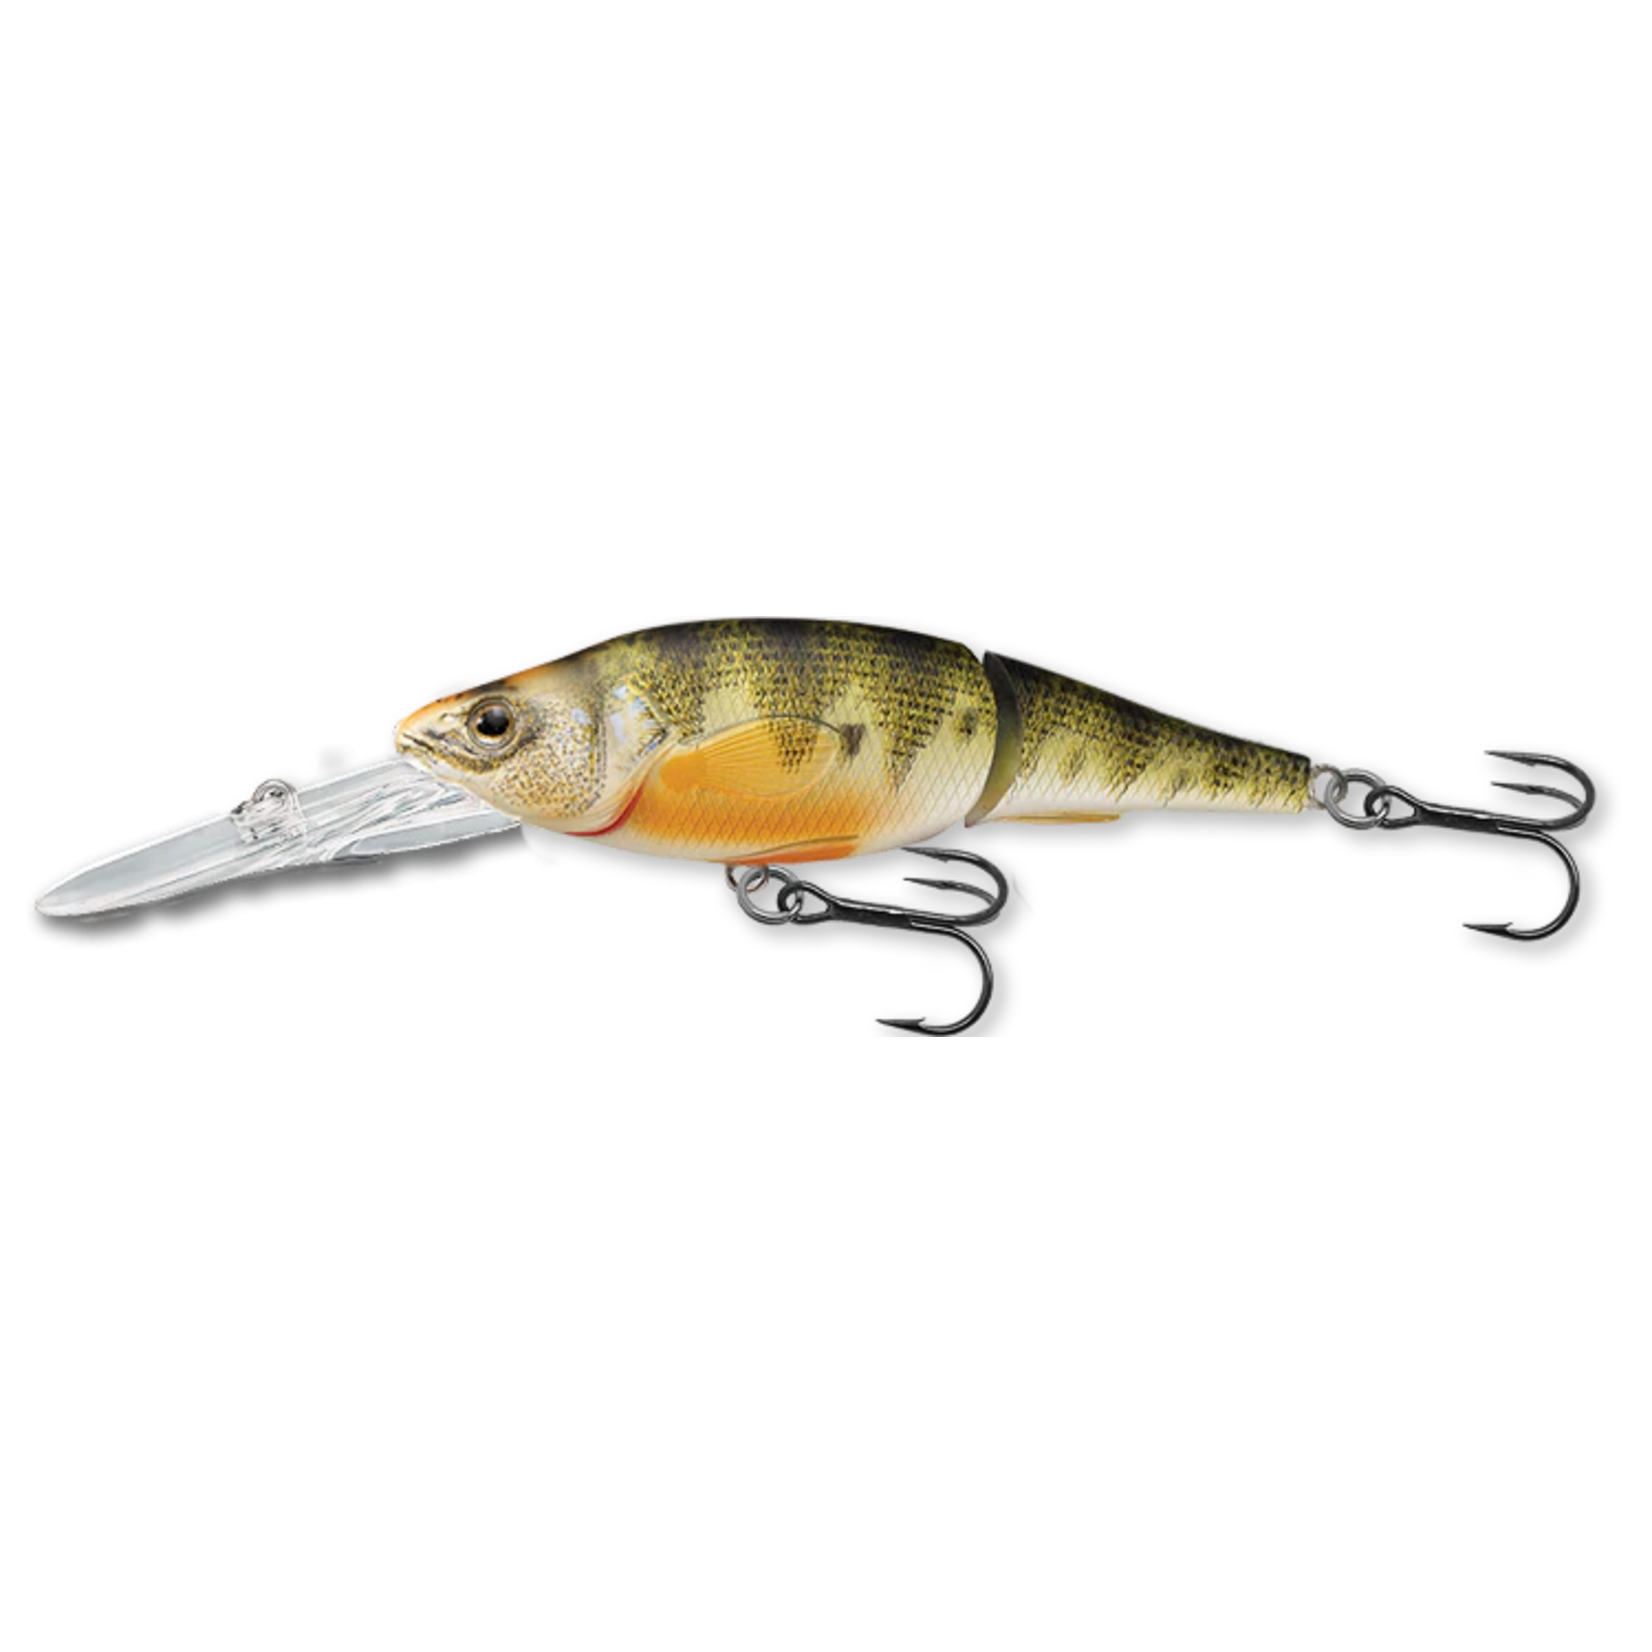 Live Target Live Target Yellow Perch Jointed Bait Natural/Matte 3 5/8 11/16 oz